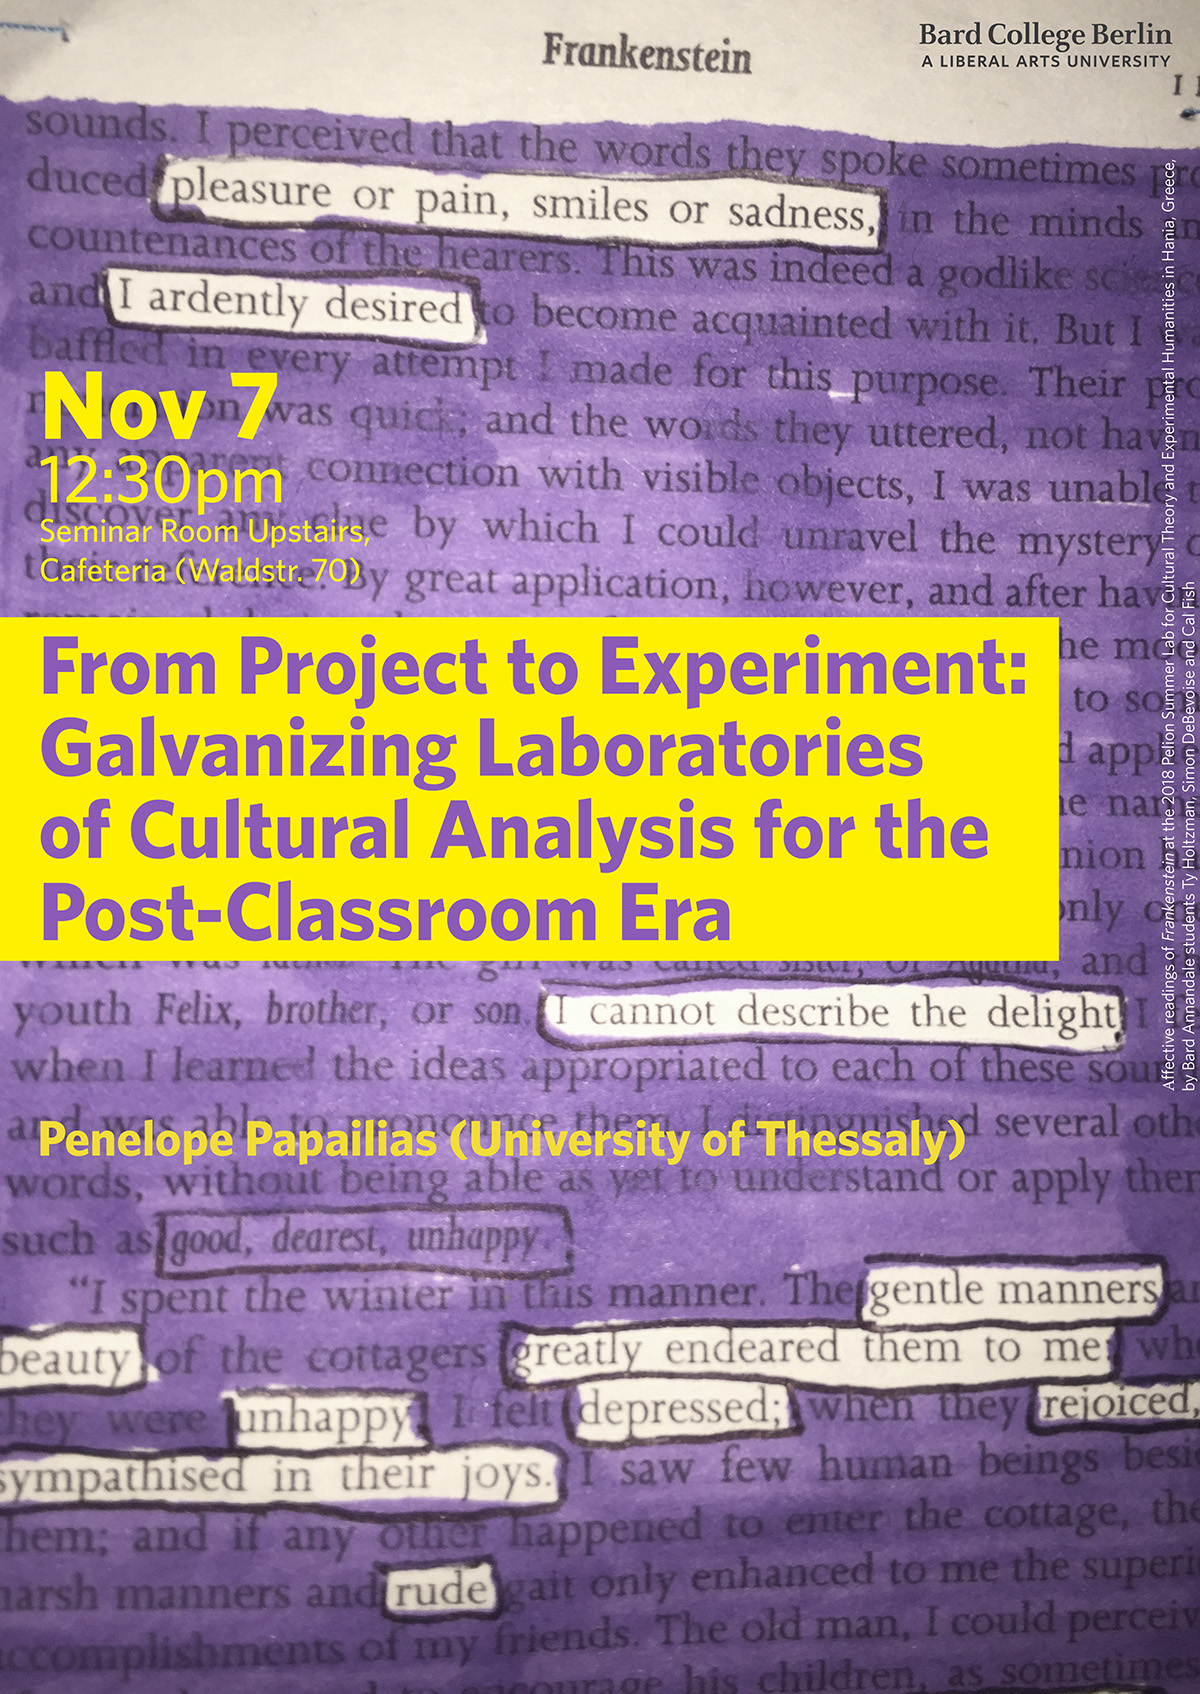 Faculty Colloquium - &quot;From Project to Experiment: Galvanizing Laboratories of Cultural Analysis for the Post-Classroom Era&quot;